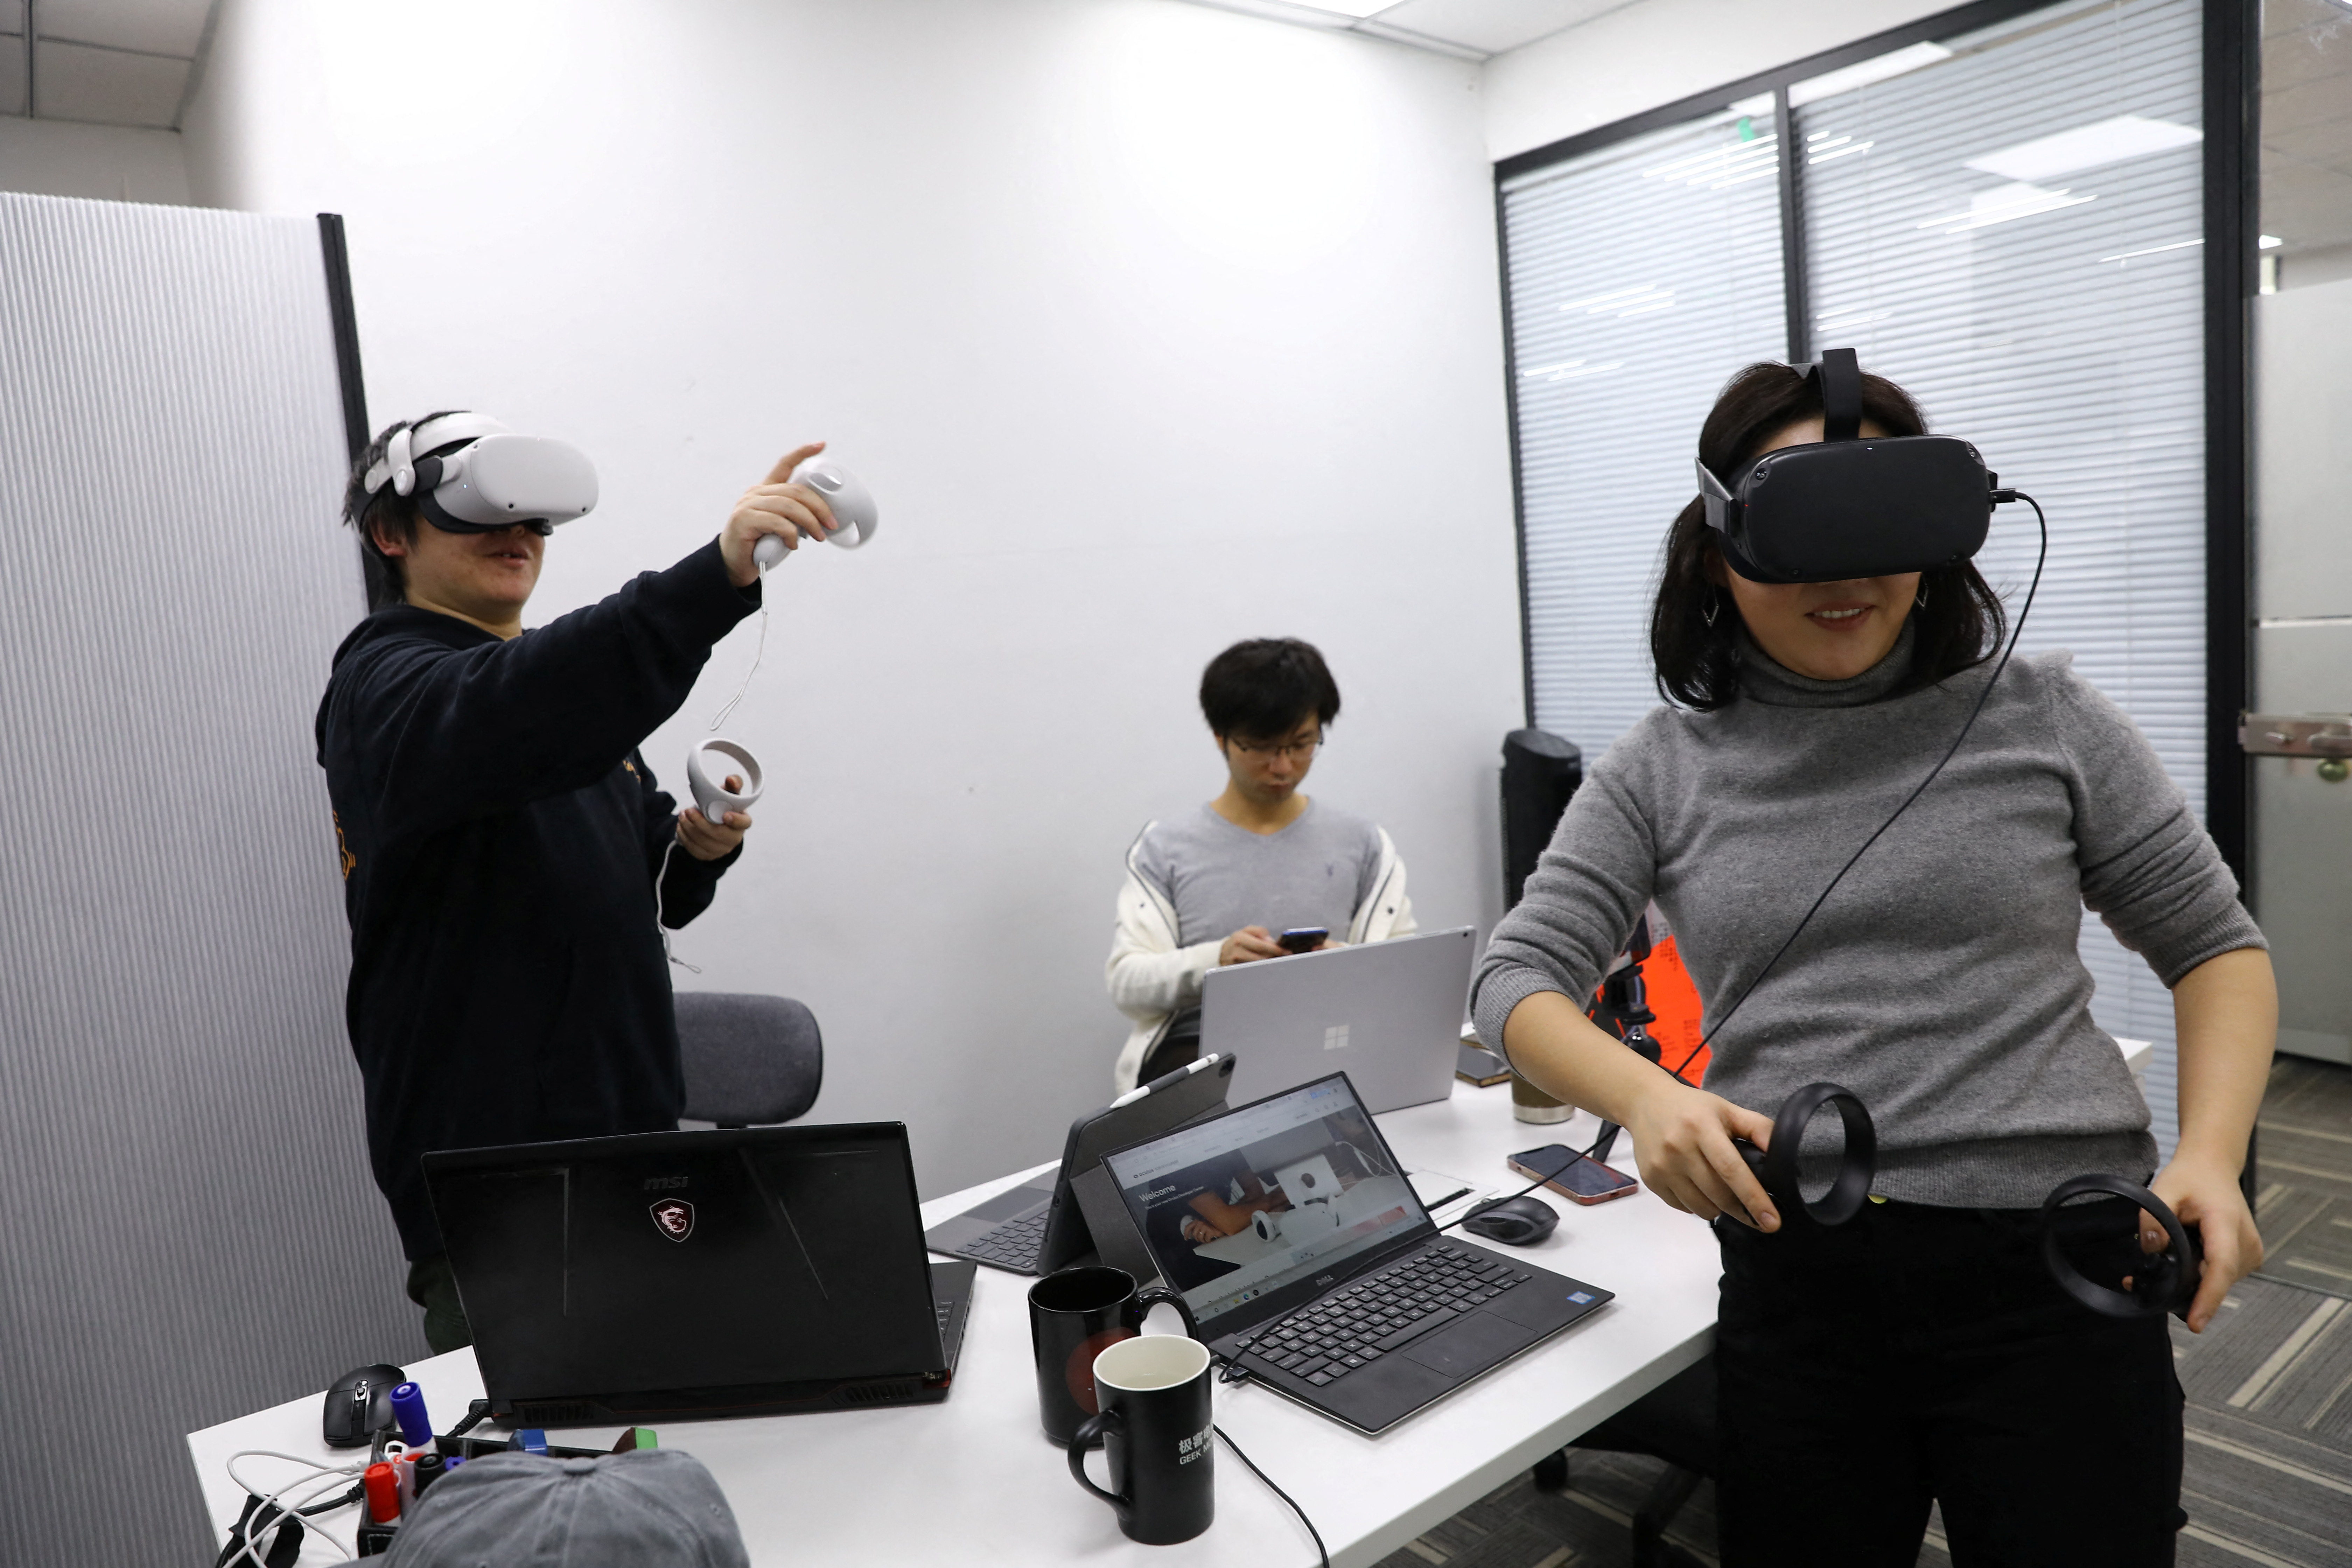 Pan Bohang, founder of vHome, a VR social gaming platform, wearing VR goggles speaks with a user during a virtual gathering, at an office in Beijing